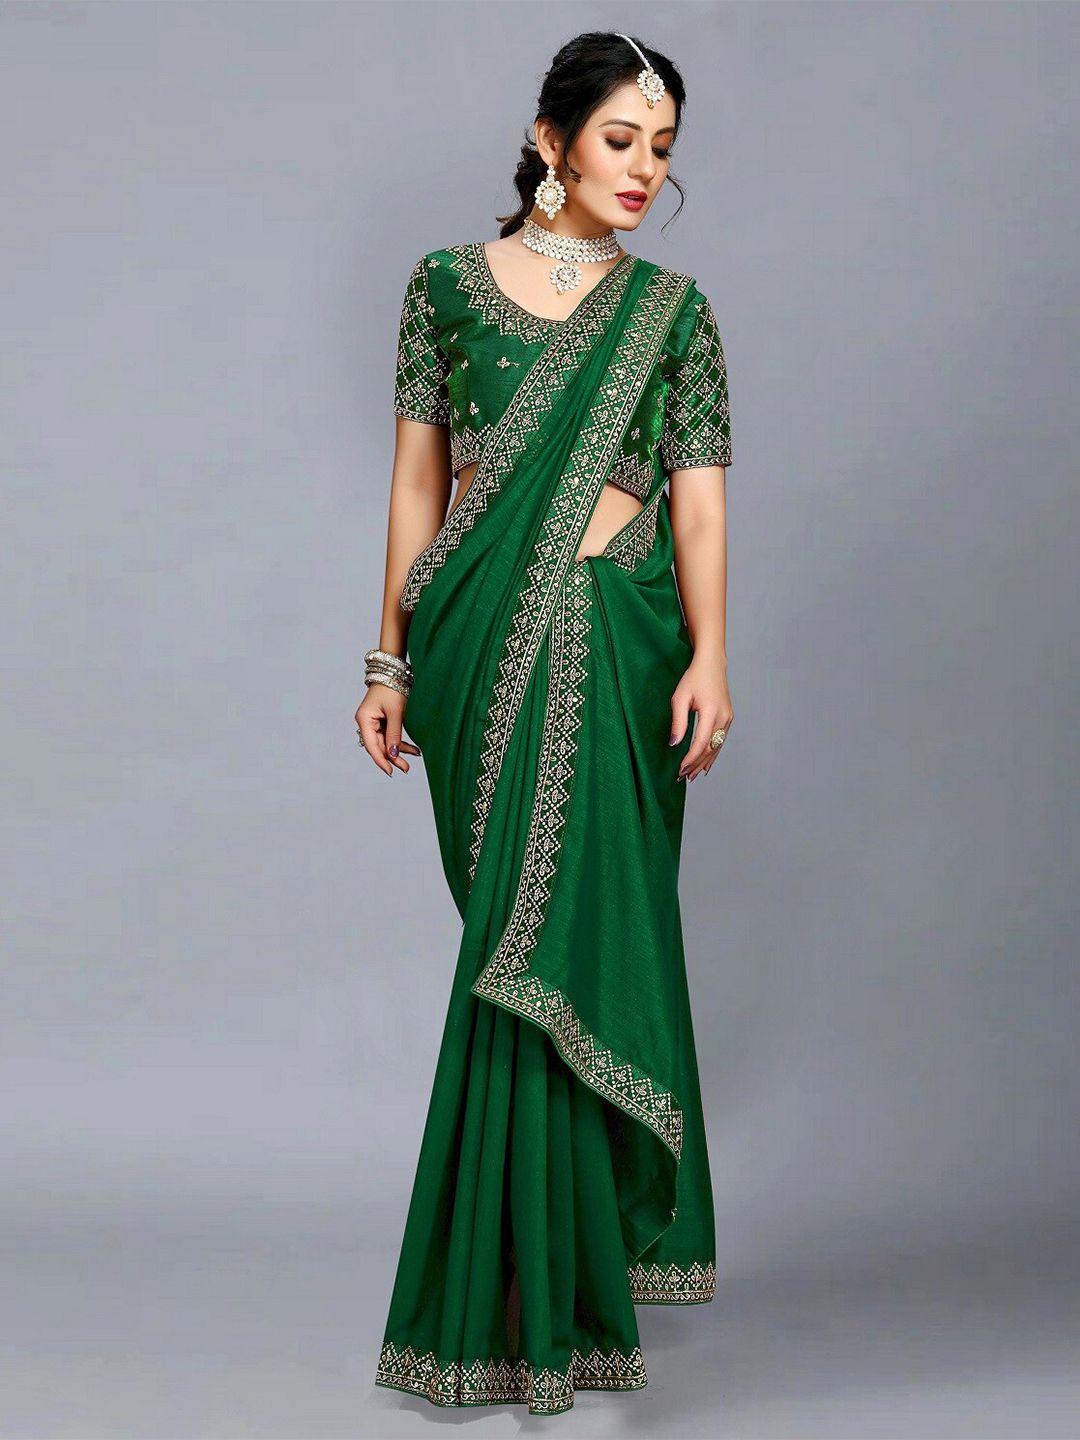 ditisa fashion green & gold-toned embroidered saree